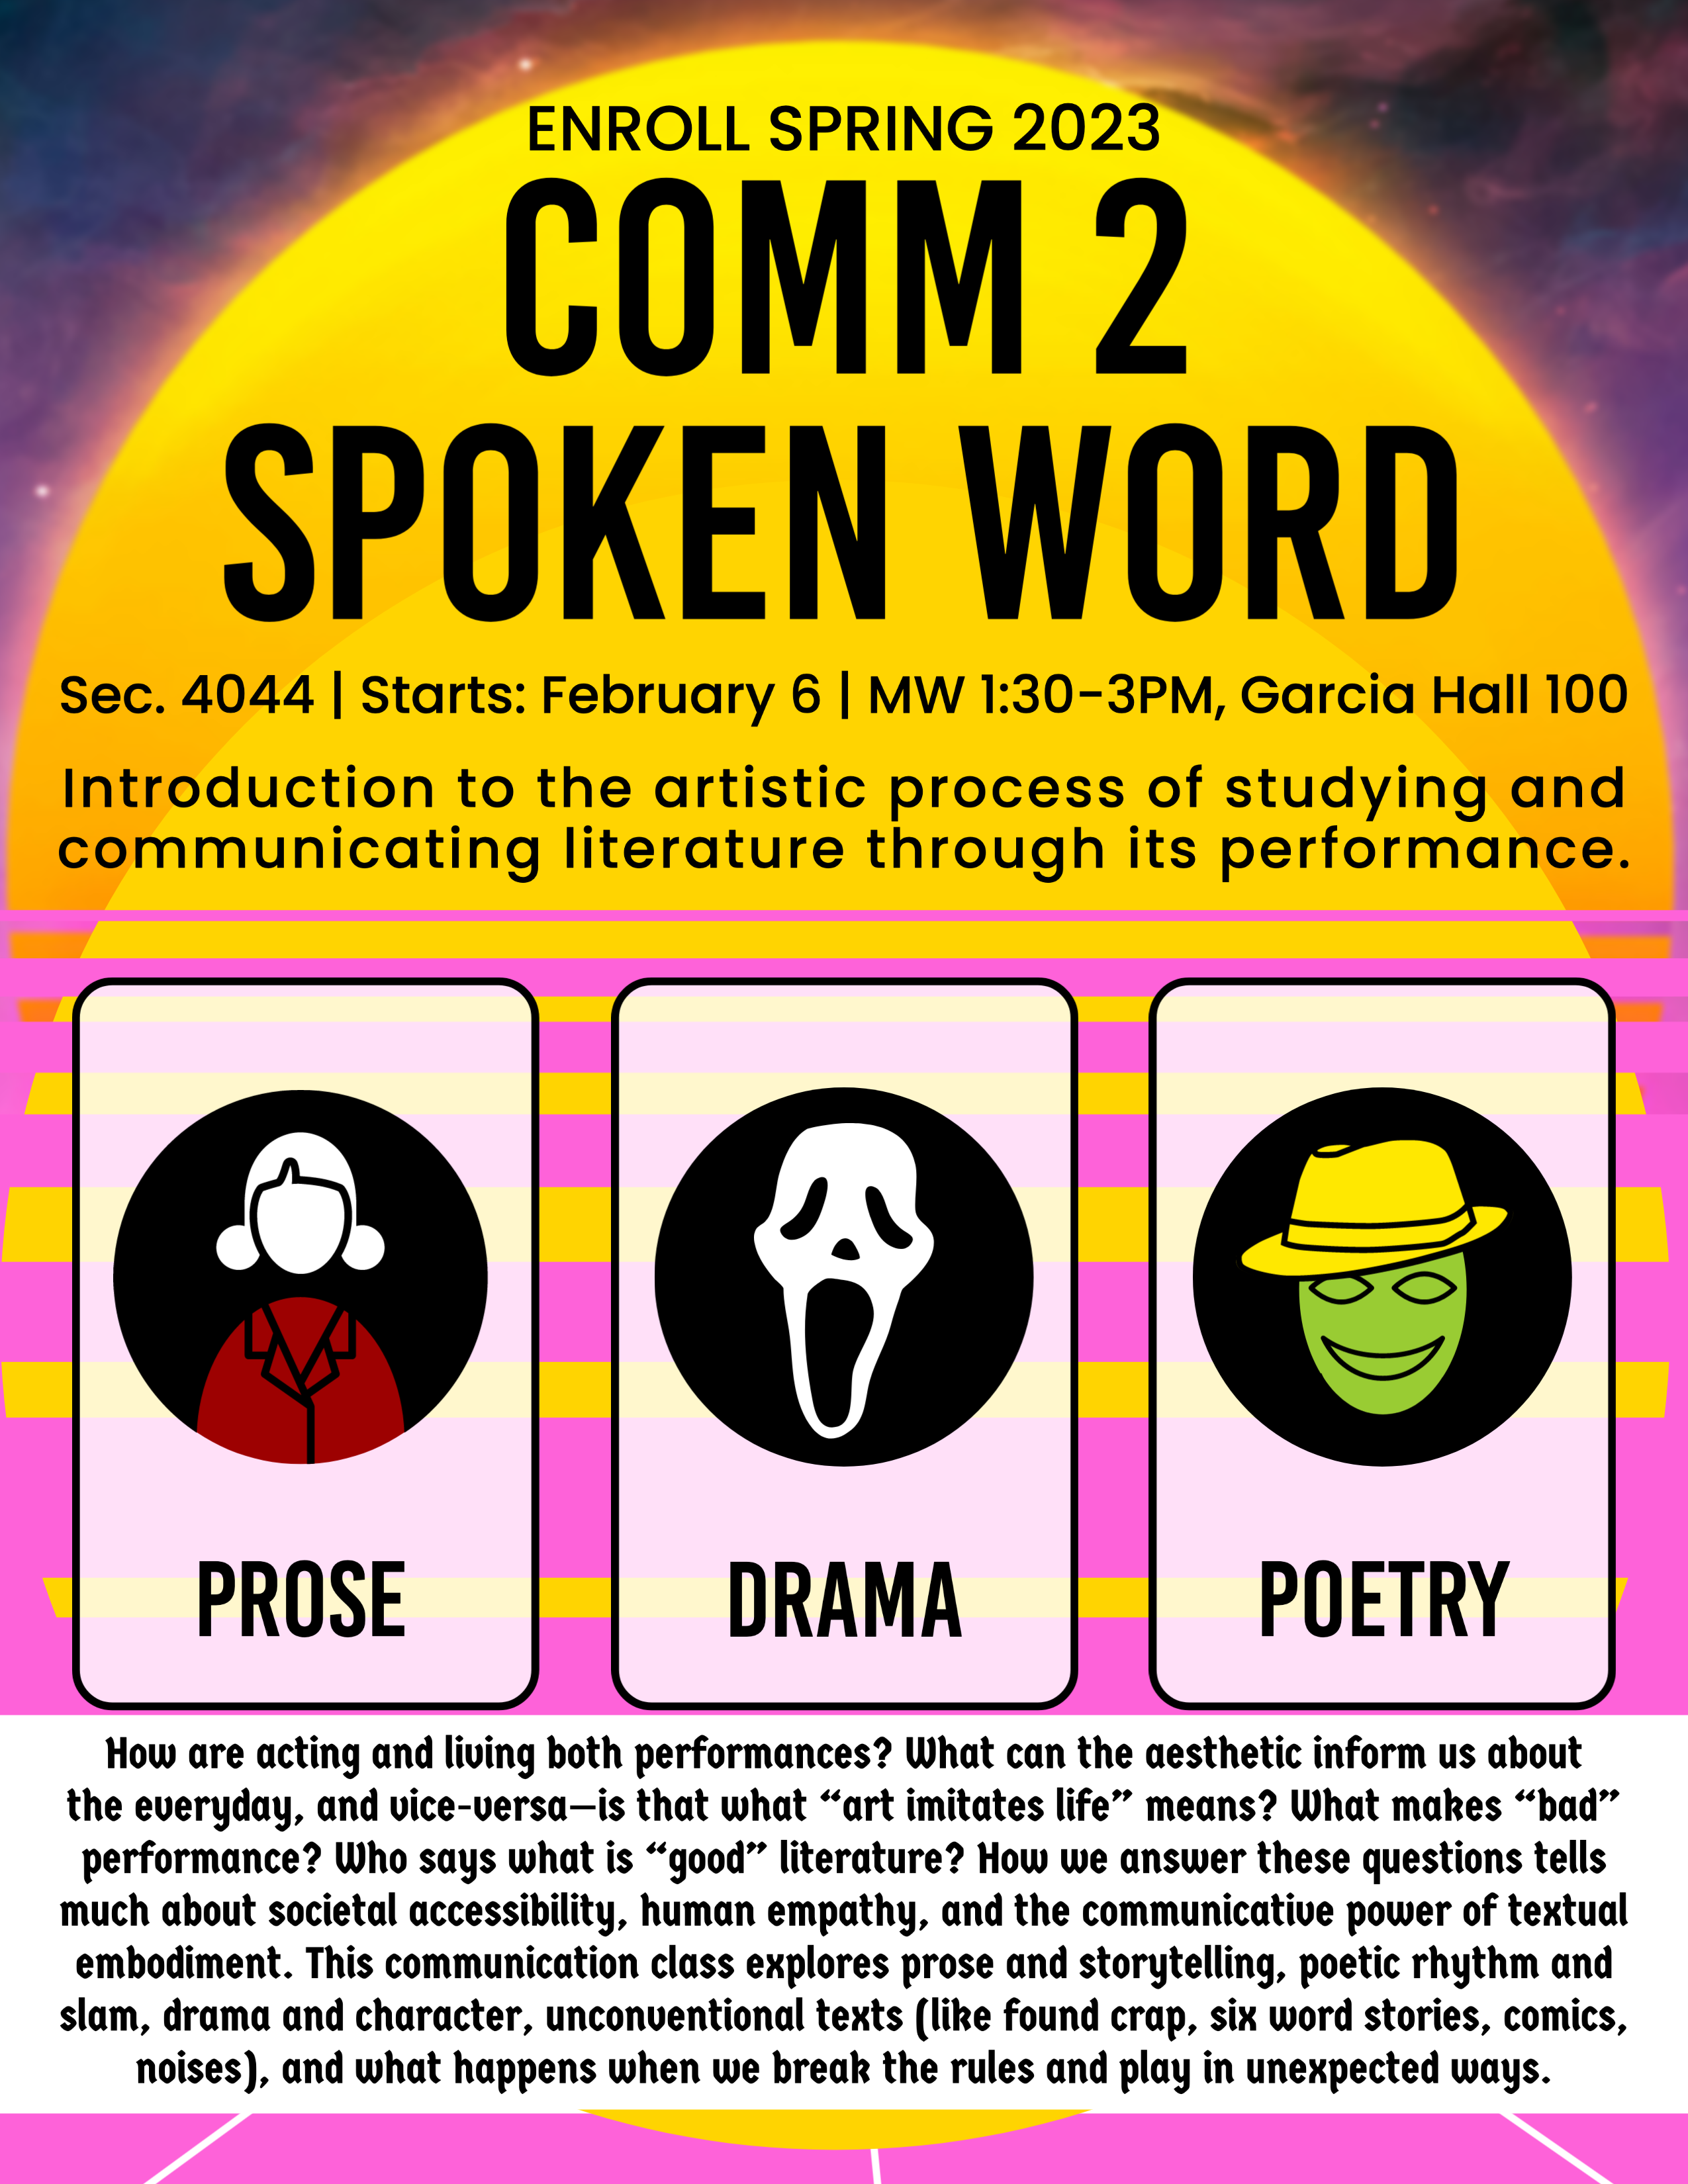 Enroll Spring 2023: Comm 2 Spoken Word Sec. 4044 | Starts: February 6 | MW 1:30-3PM, Garcia Hall 100 Introduction to the artistic process of studying and communicating literature through its performance.  How are acting and living both performances? What can the aesthetic inform us about the everyday, and vice-versa—is that what “art imitates life” means? What makes “bad” performance? Who says what is “good” literature? How we answer these questions tells much about societal accessibility, human empathy, and the communicative power of textual embodiment. This communication class explores prose and storytelling, poetic rhythm and slam, drama and character, unconventional texts (like found crap, six word stories, comics, noises), and what happens when we break the rules and play in unexpected ways.